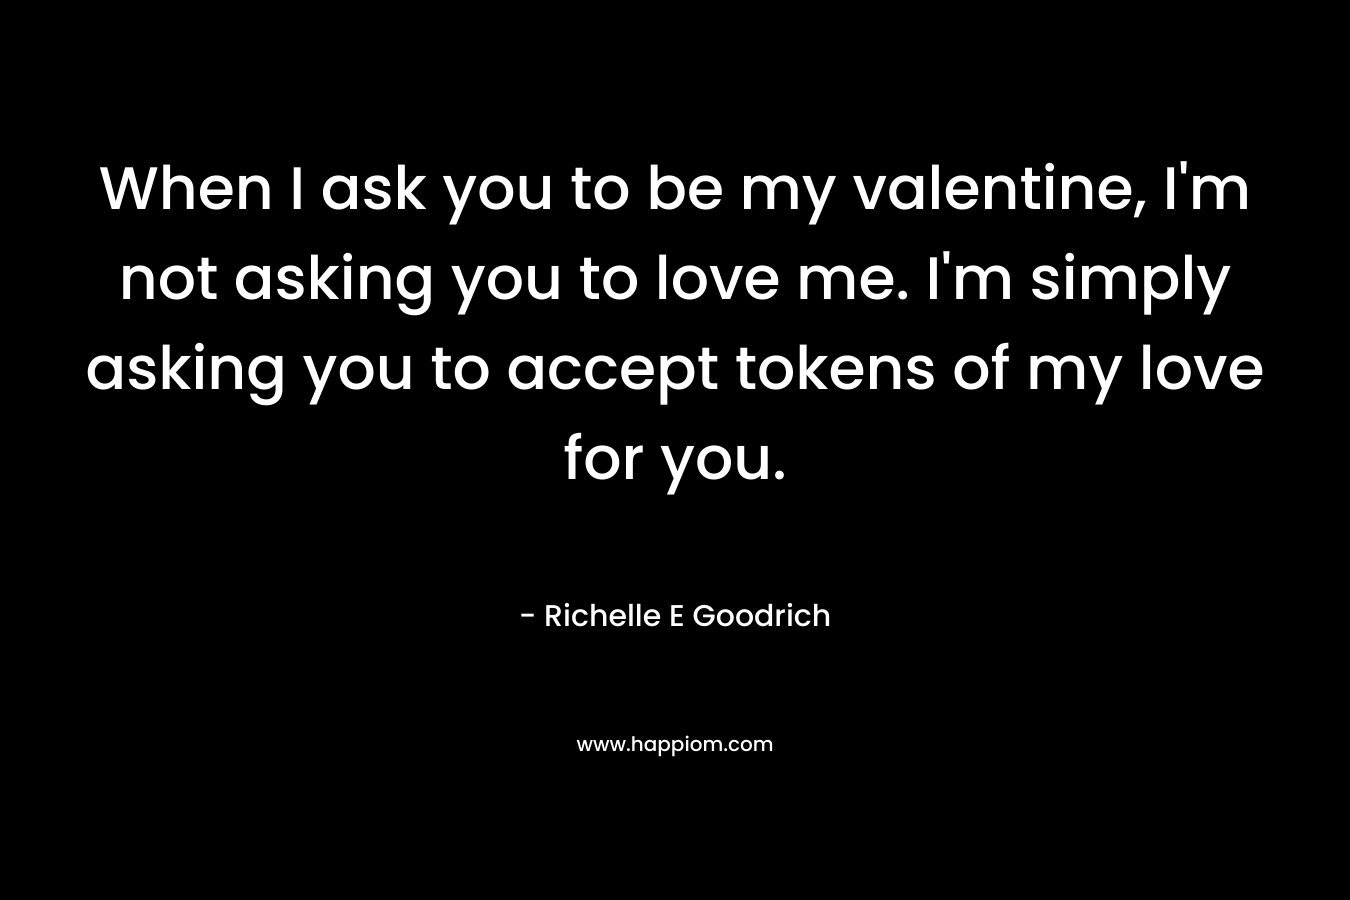 When I ask you to be my valentine, I’m not asking you to love me. I’m simply asking you to accept tokens of my love for you. – Richelle E Goodrich